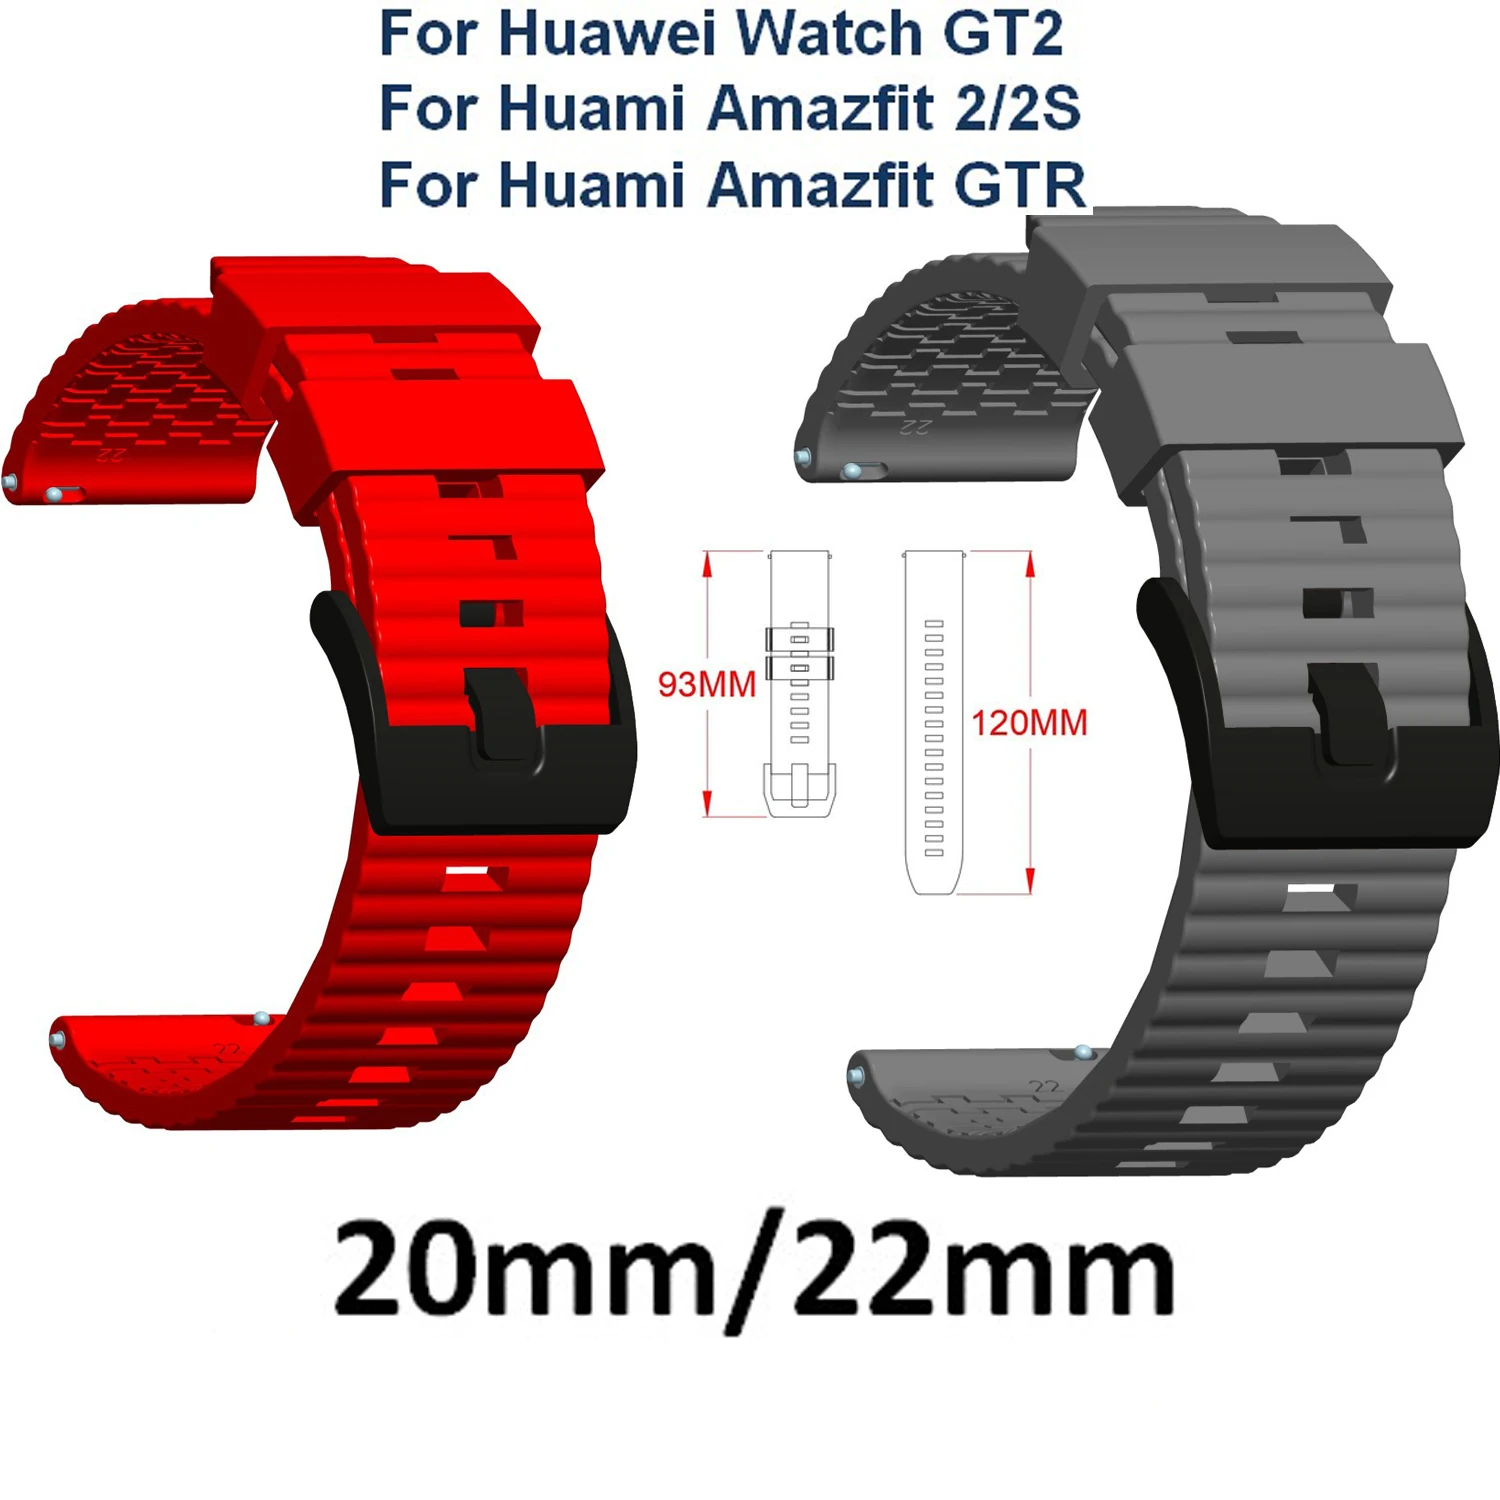 

20mm 22mm whatch Band For huawei watch GT Bracelet Smart Wrist for Samsung Gear S3/S2/S4 Strap for Amazfit Bip/Amazfit GTR Watch